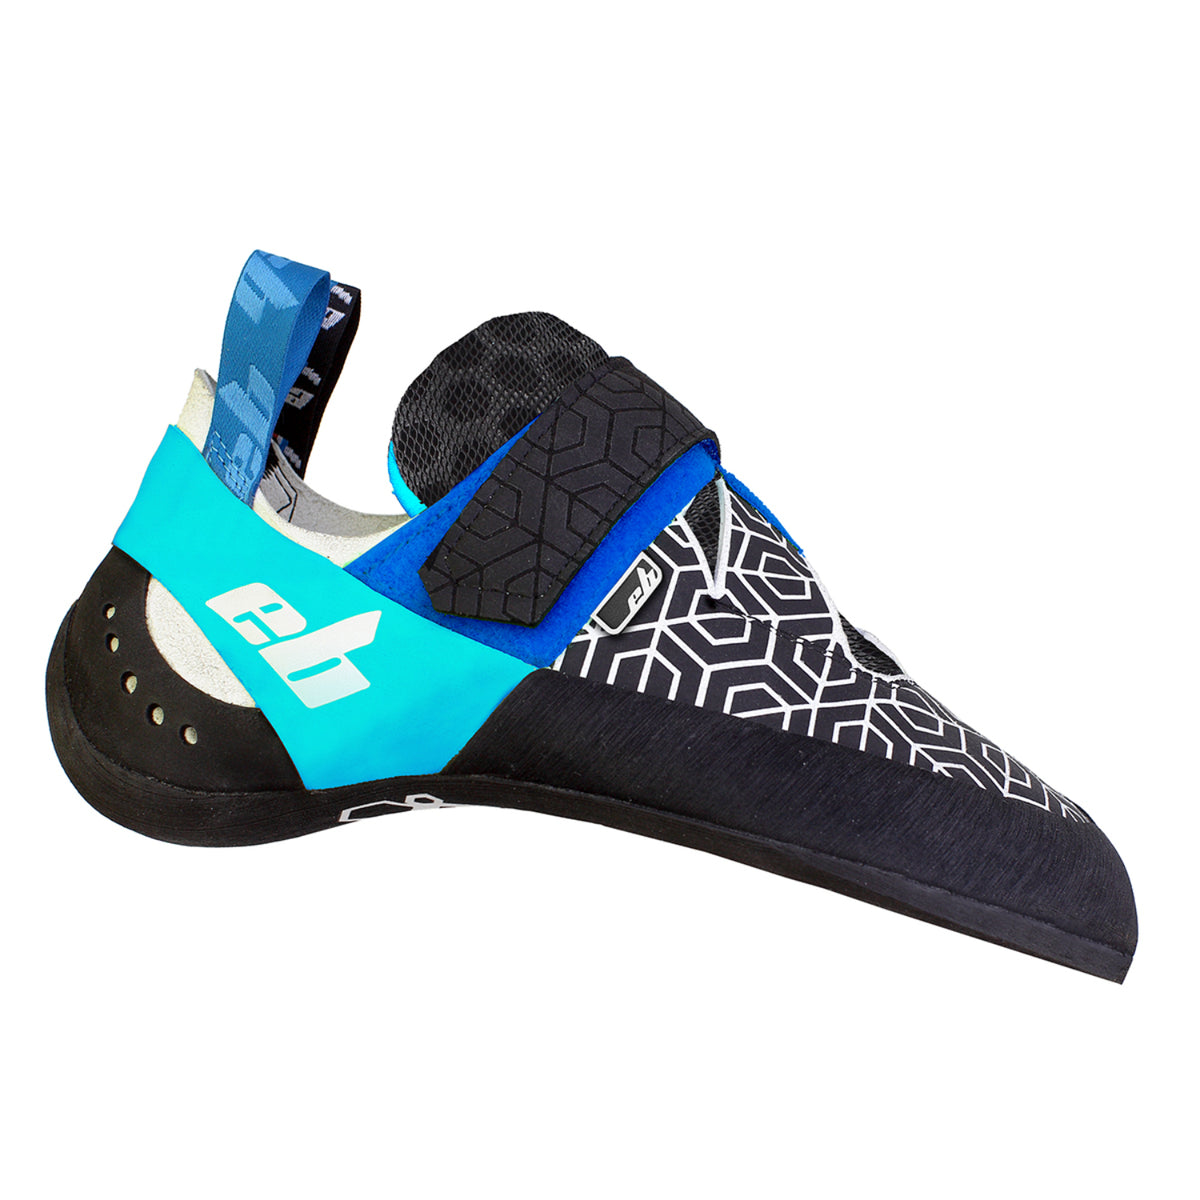 EB Guardian 3.0 climbing shoe showing the outside logo and upper pattern